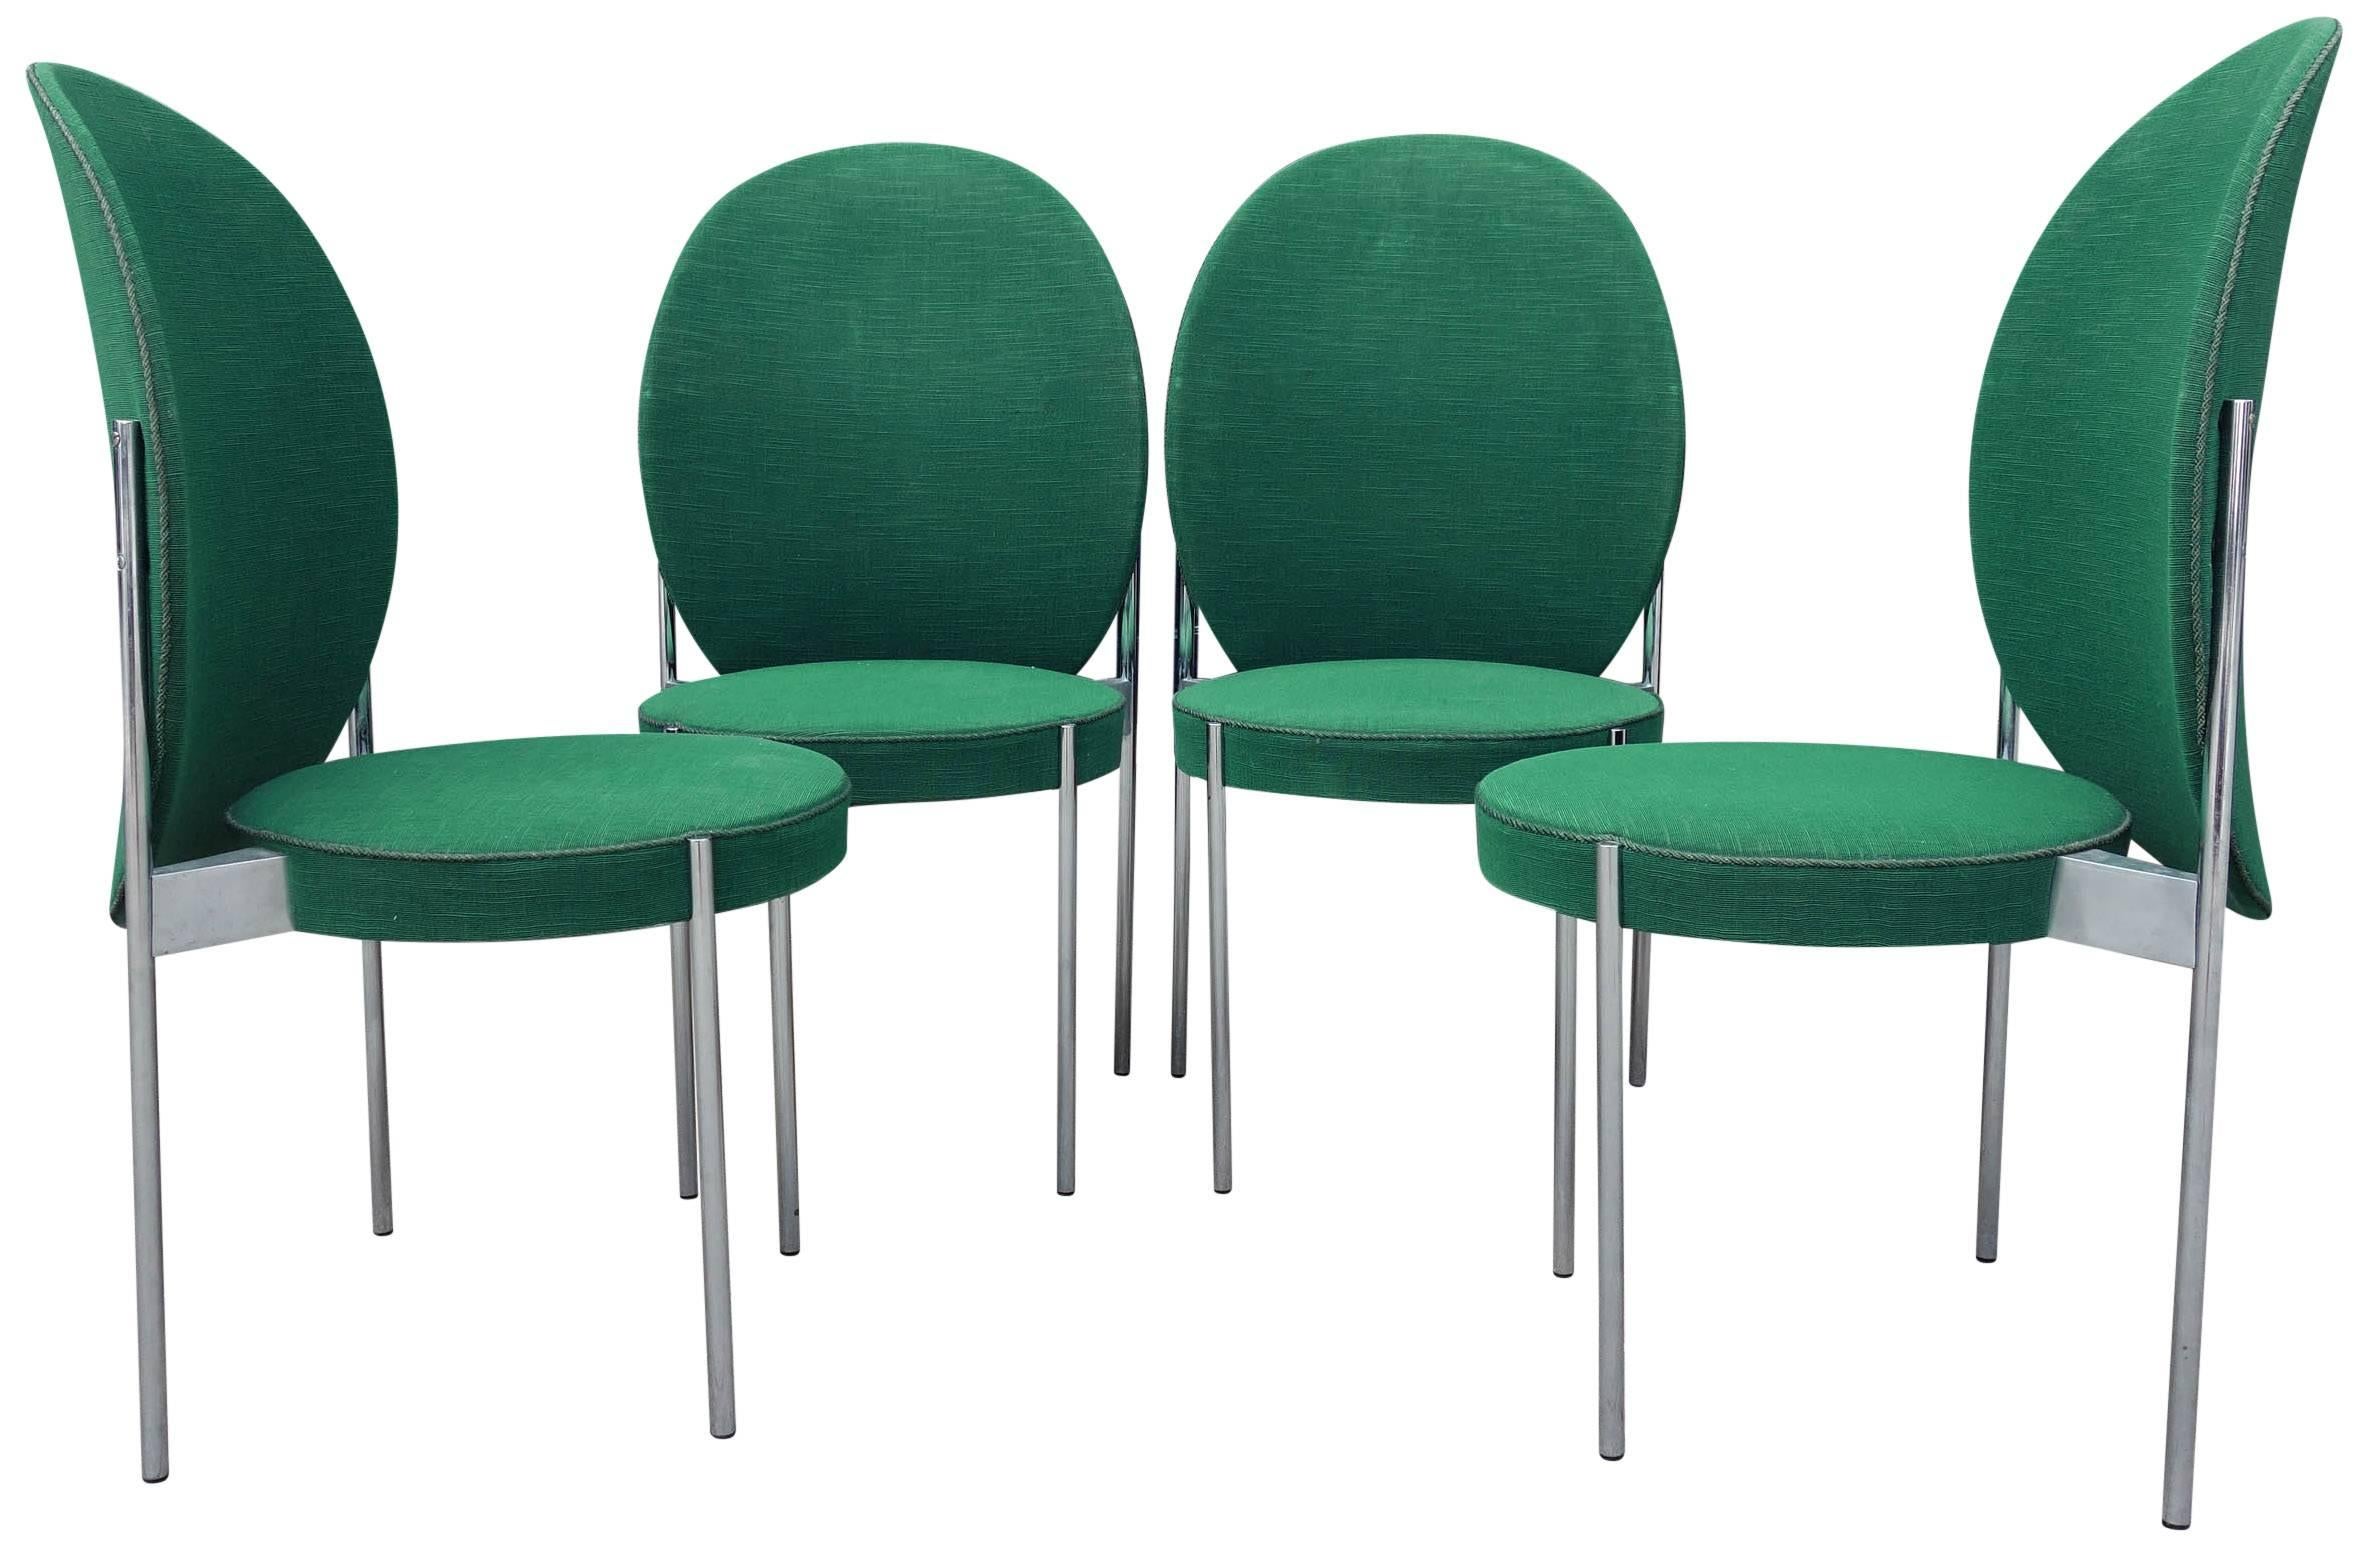 Very rare set of (4) four Mid-Century high-back chairs designed by Verner Panton. Tubular metal frame with original upholstery (also deigned by Verner Panton). Produced for a short period of time. Model no. 430. Recommended for reupholstery. Sold as